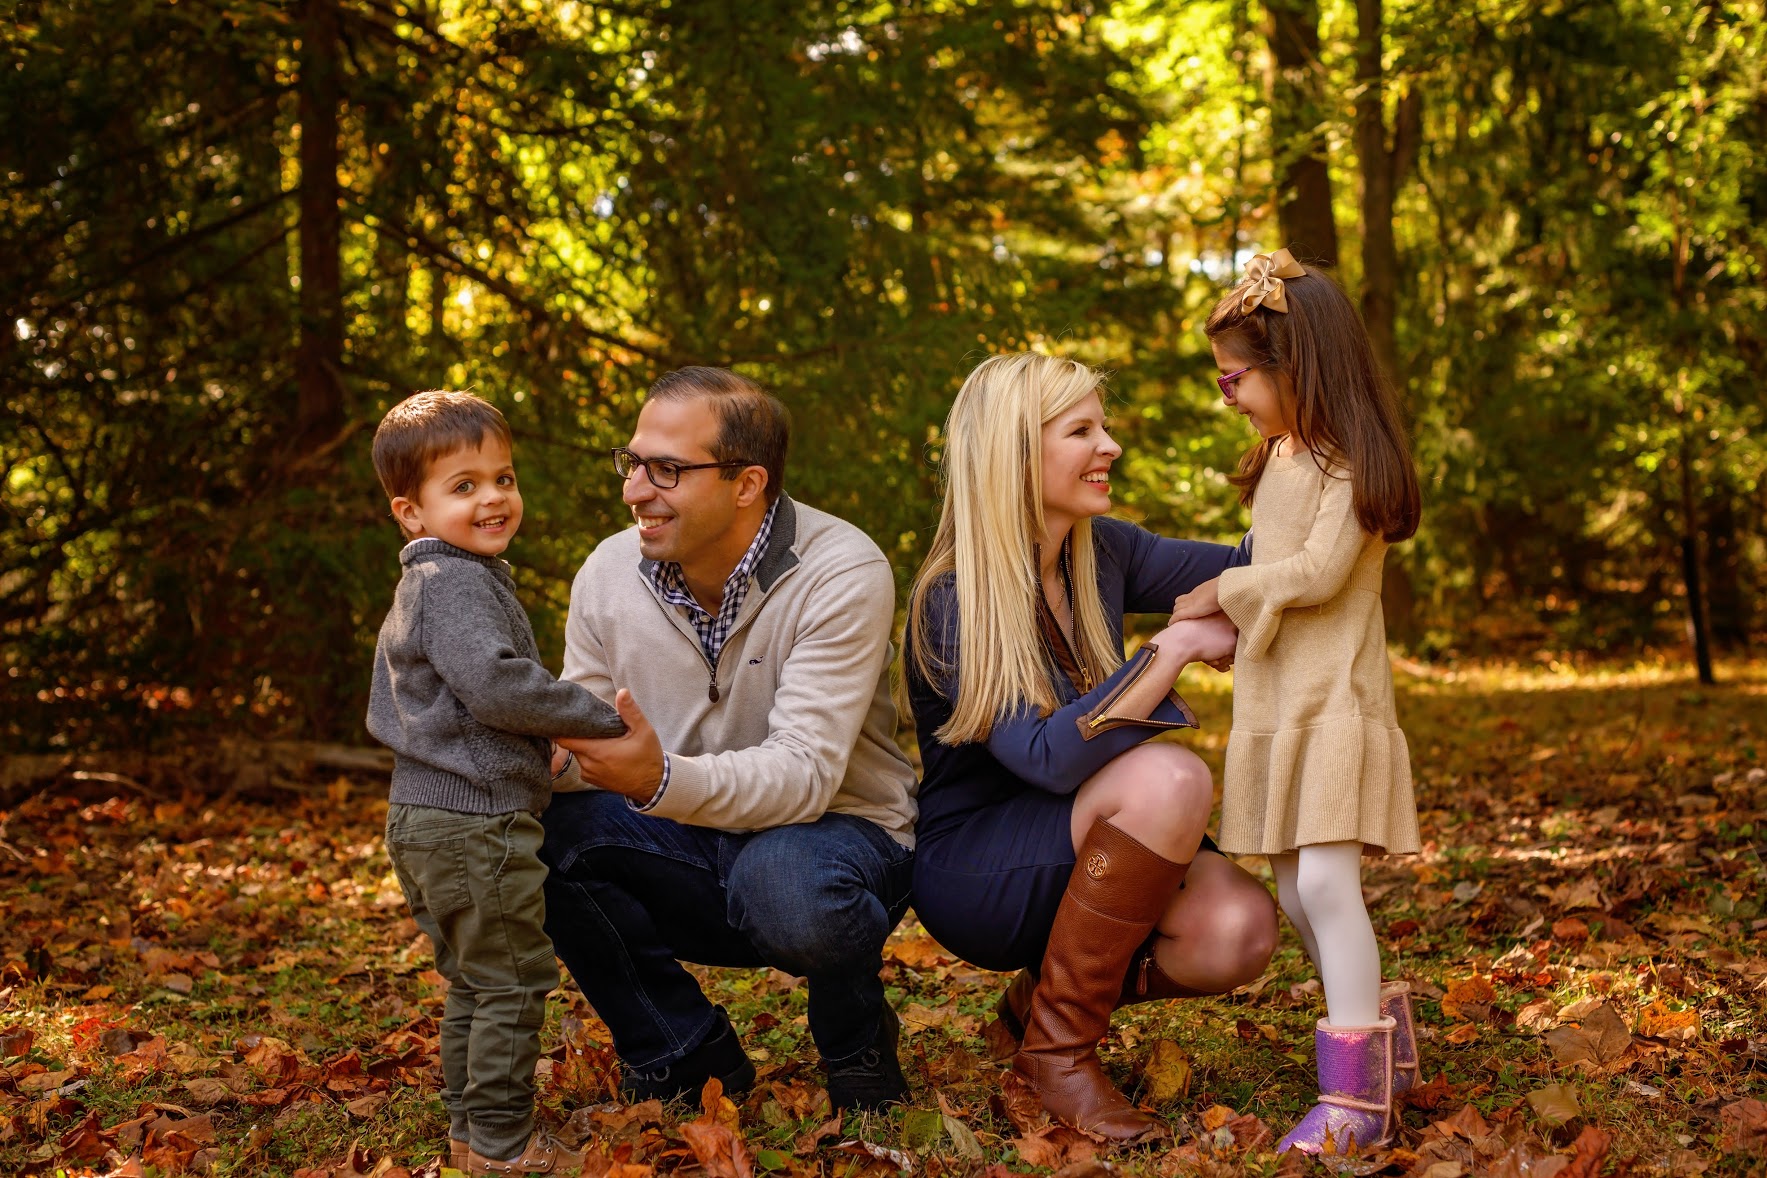 Colleen Ganjian with her husband, Ali, her daughter, Caroline, and her son, James. (Melody Yazdani Photography)